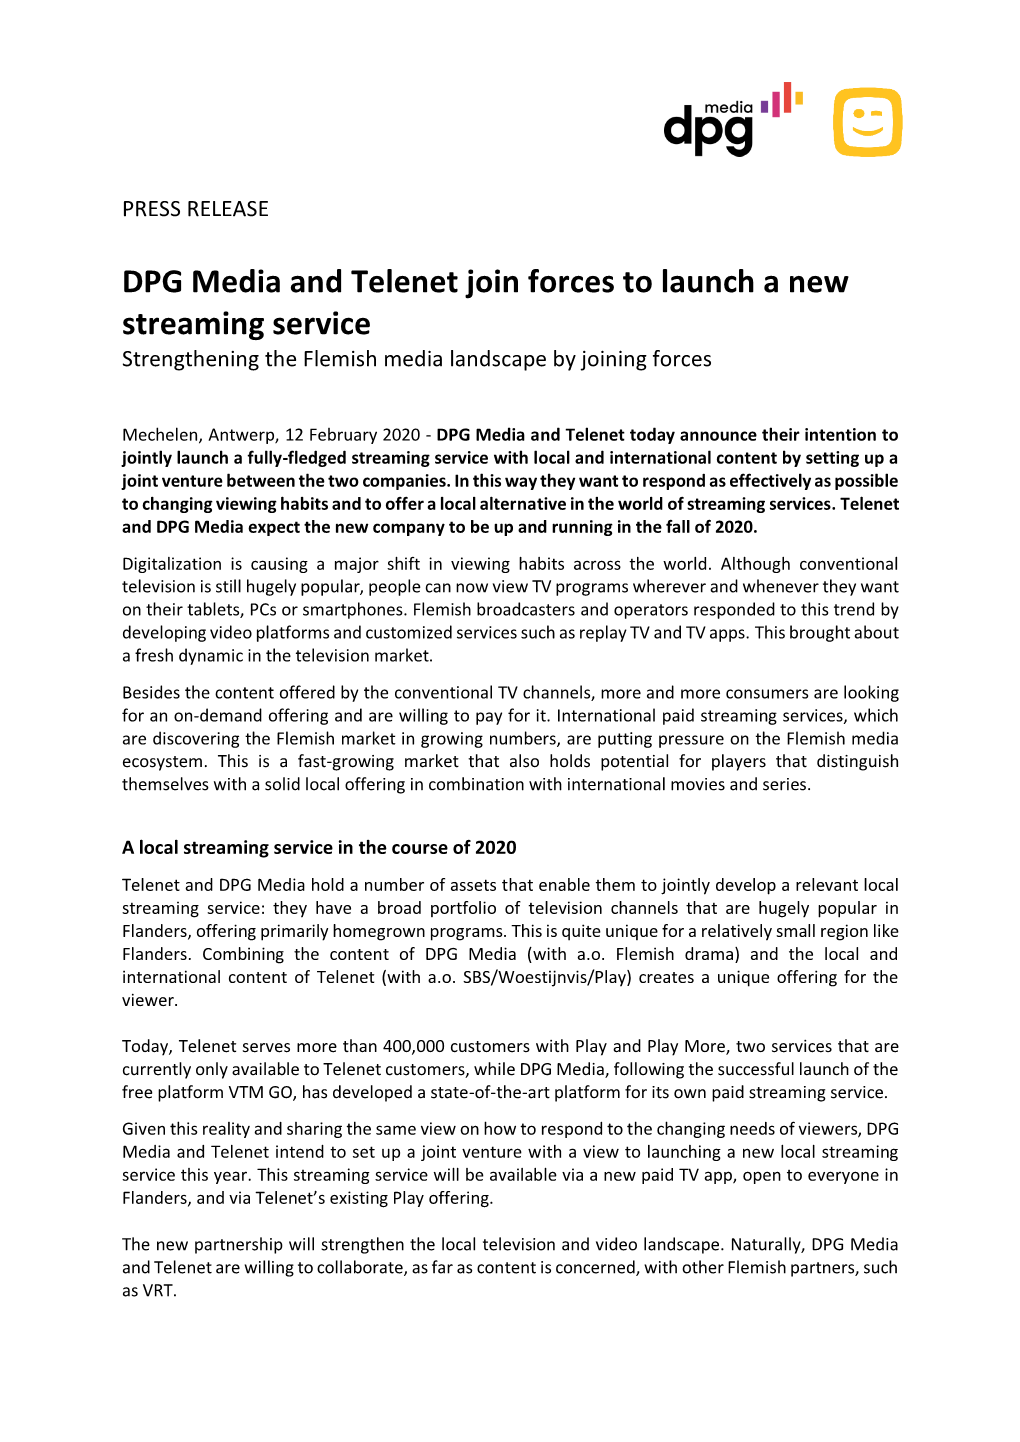 DPG Media and Telenet Join Forces to Launch a New Streaming Service Strengthening the Flemish Media Landscape by Joining Forces